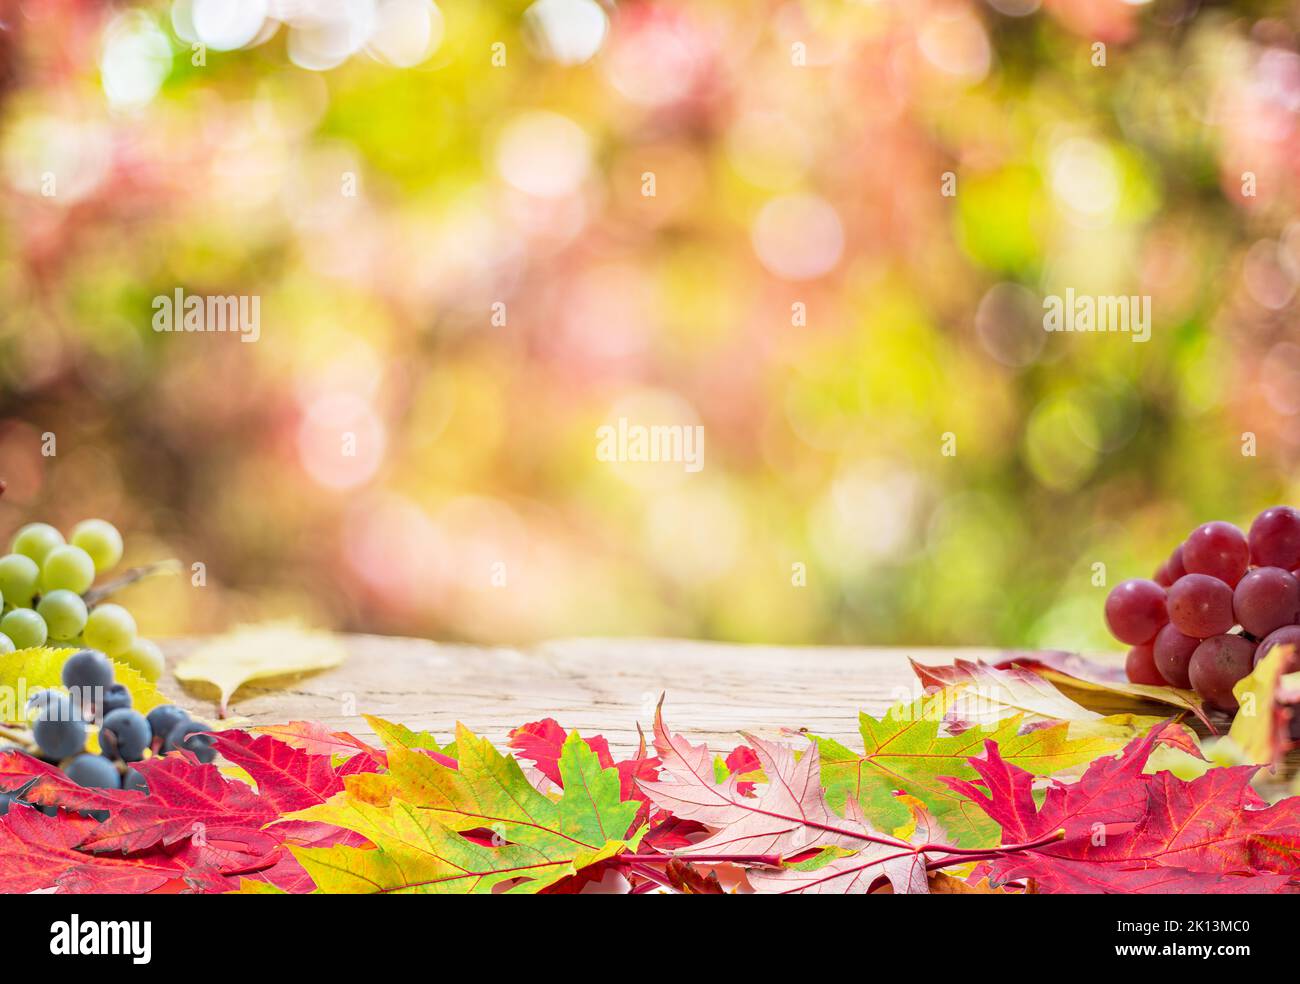 Autumn background with a whis autumn colorful leaves and beautiful sunny bokeh. Stock Photo